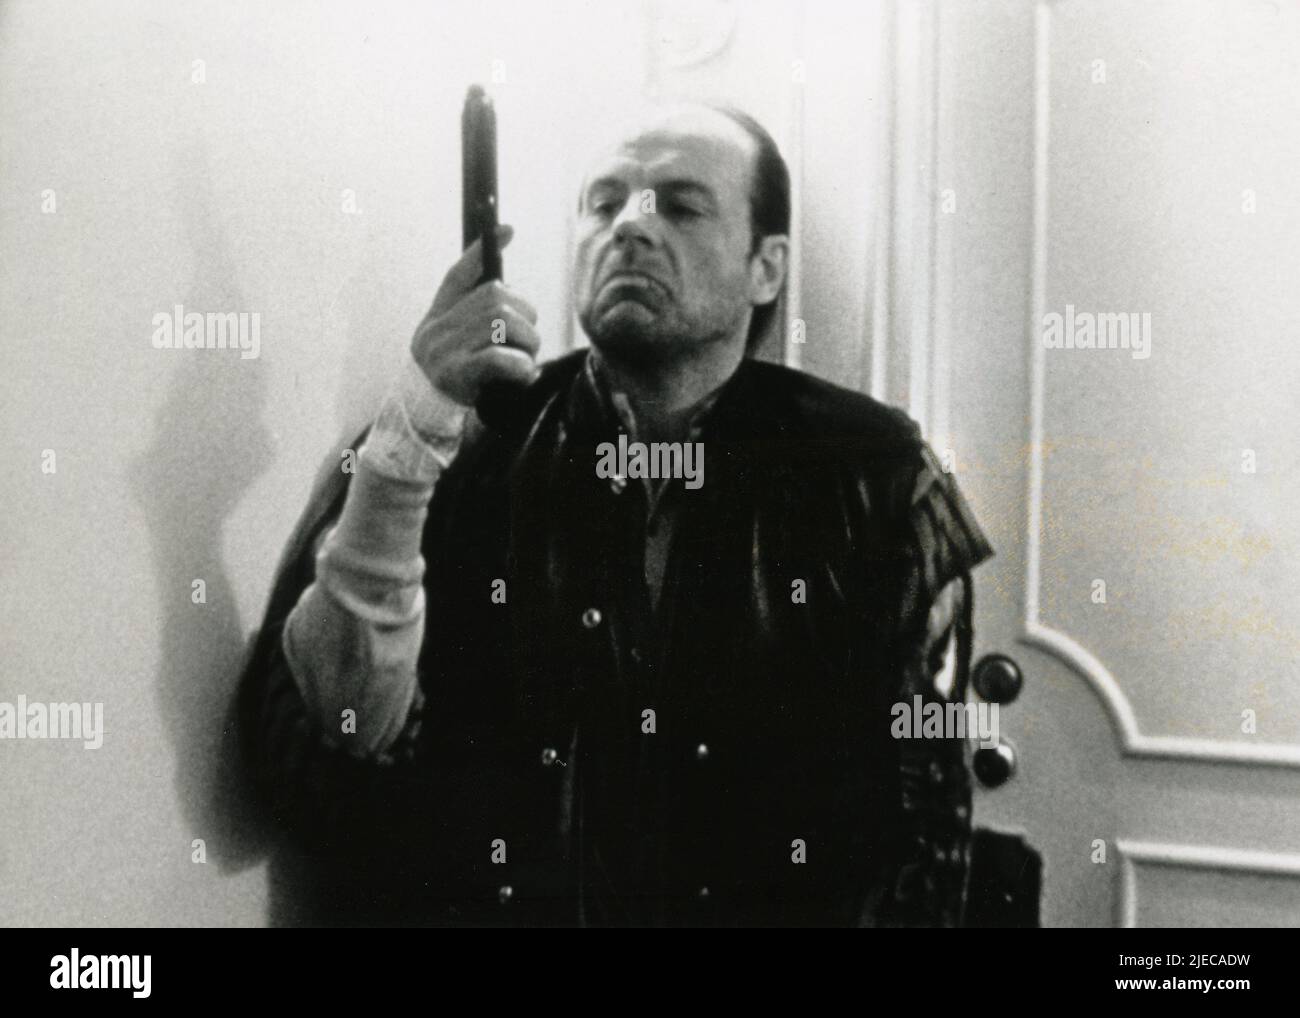 Canadian actor Michael Ironside in the movie Deadly Surveillance, USA 1991 Stock Photo